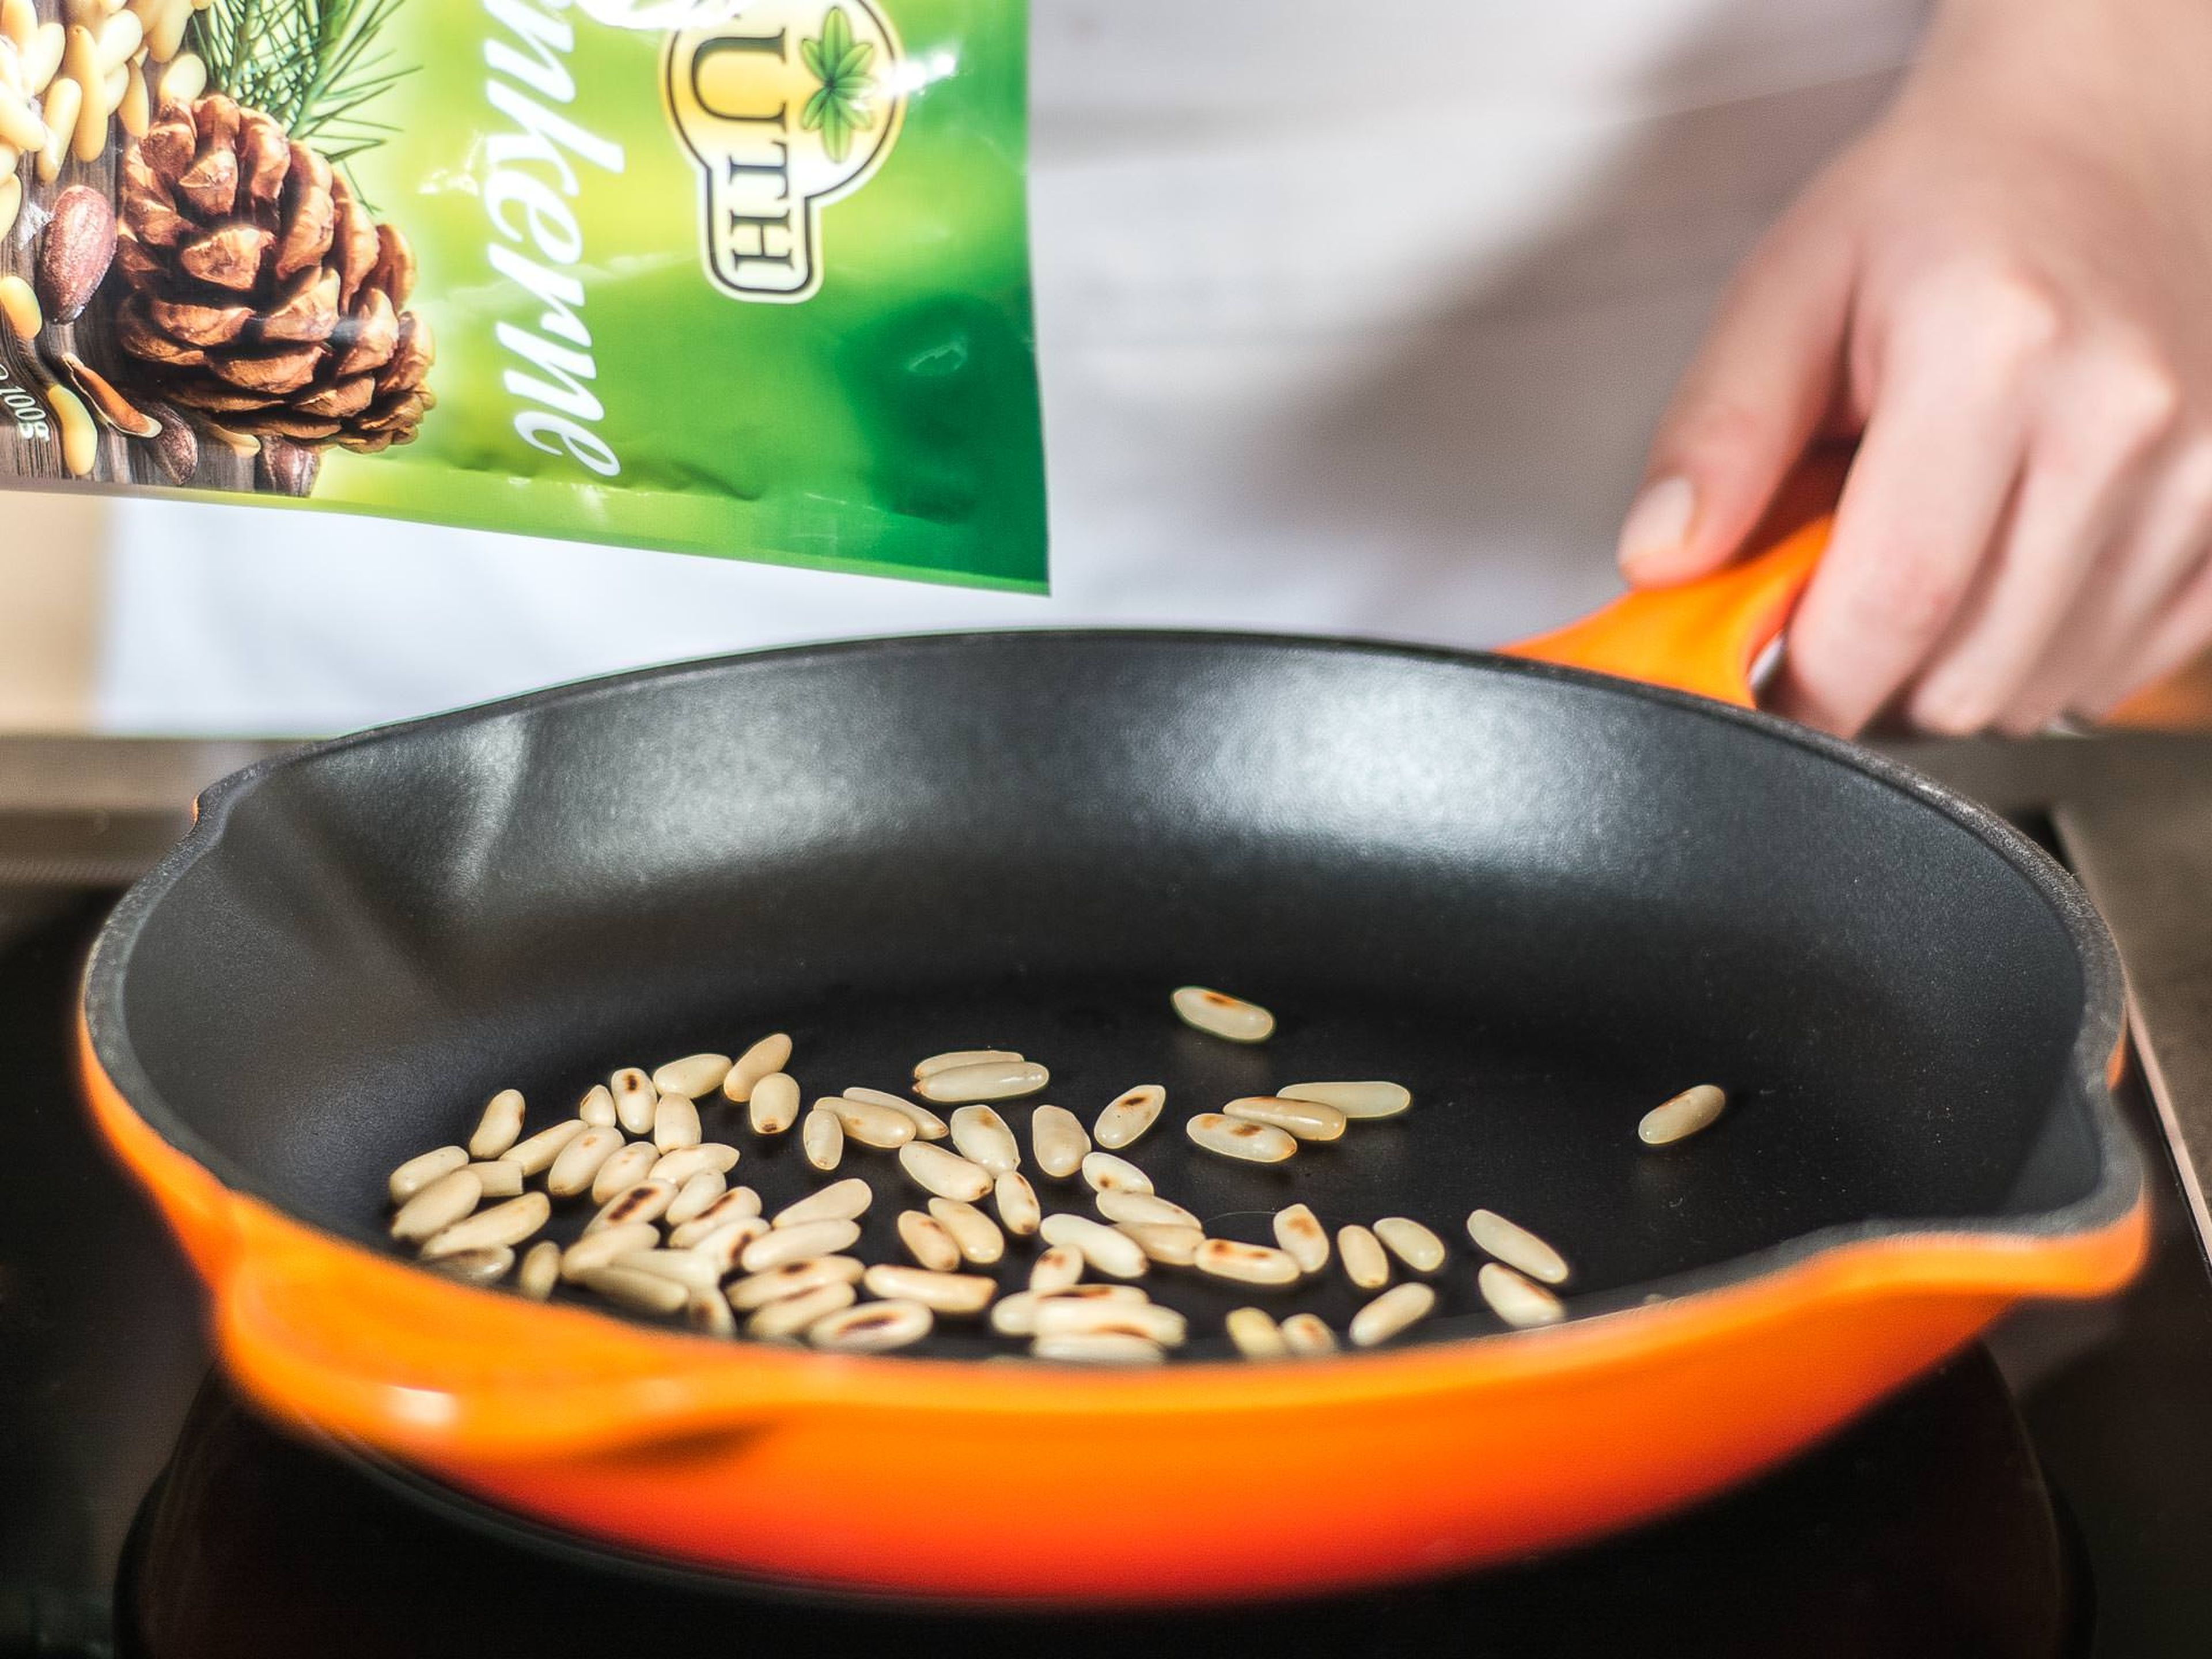 In a grease-free frying pan, roast the pine nuts over medium heat, stirring often, for approx. 2 – 3 min. until golden brown and fragrant.